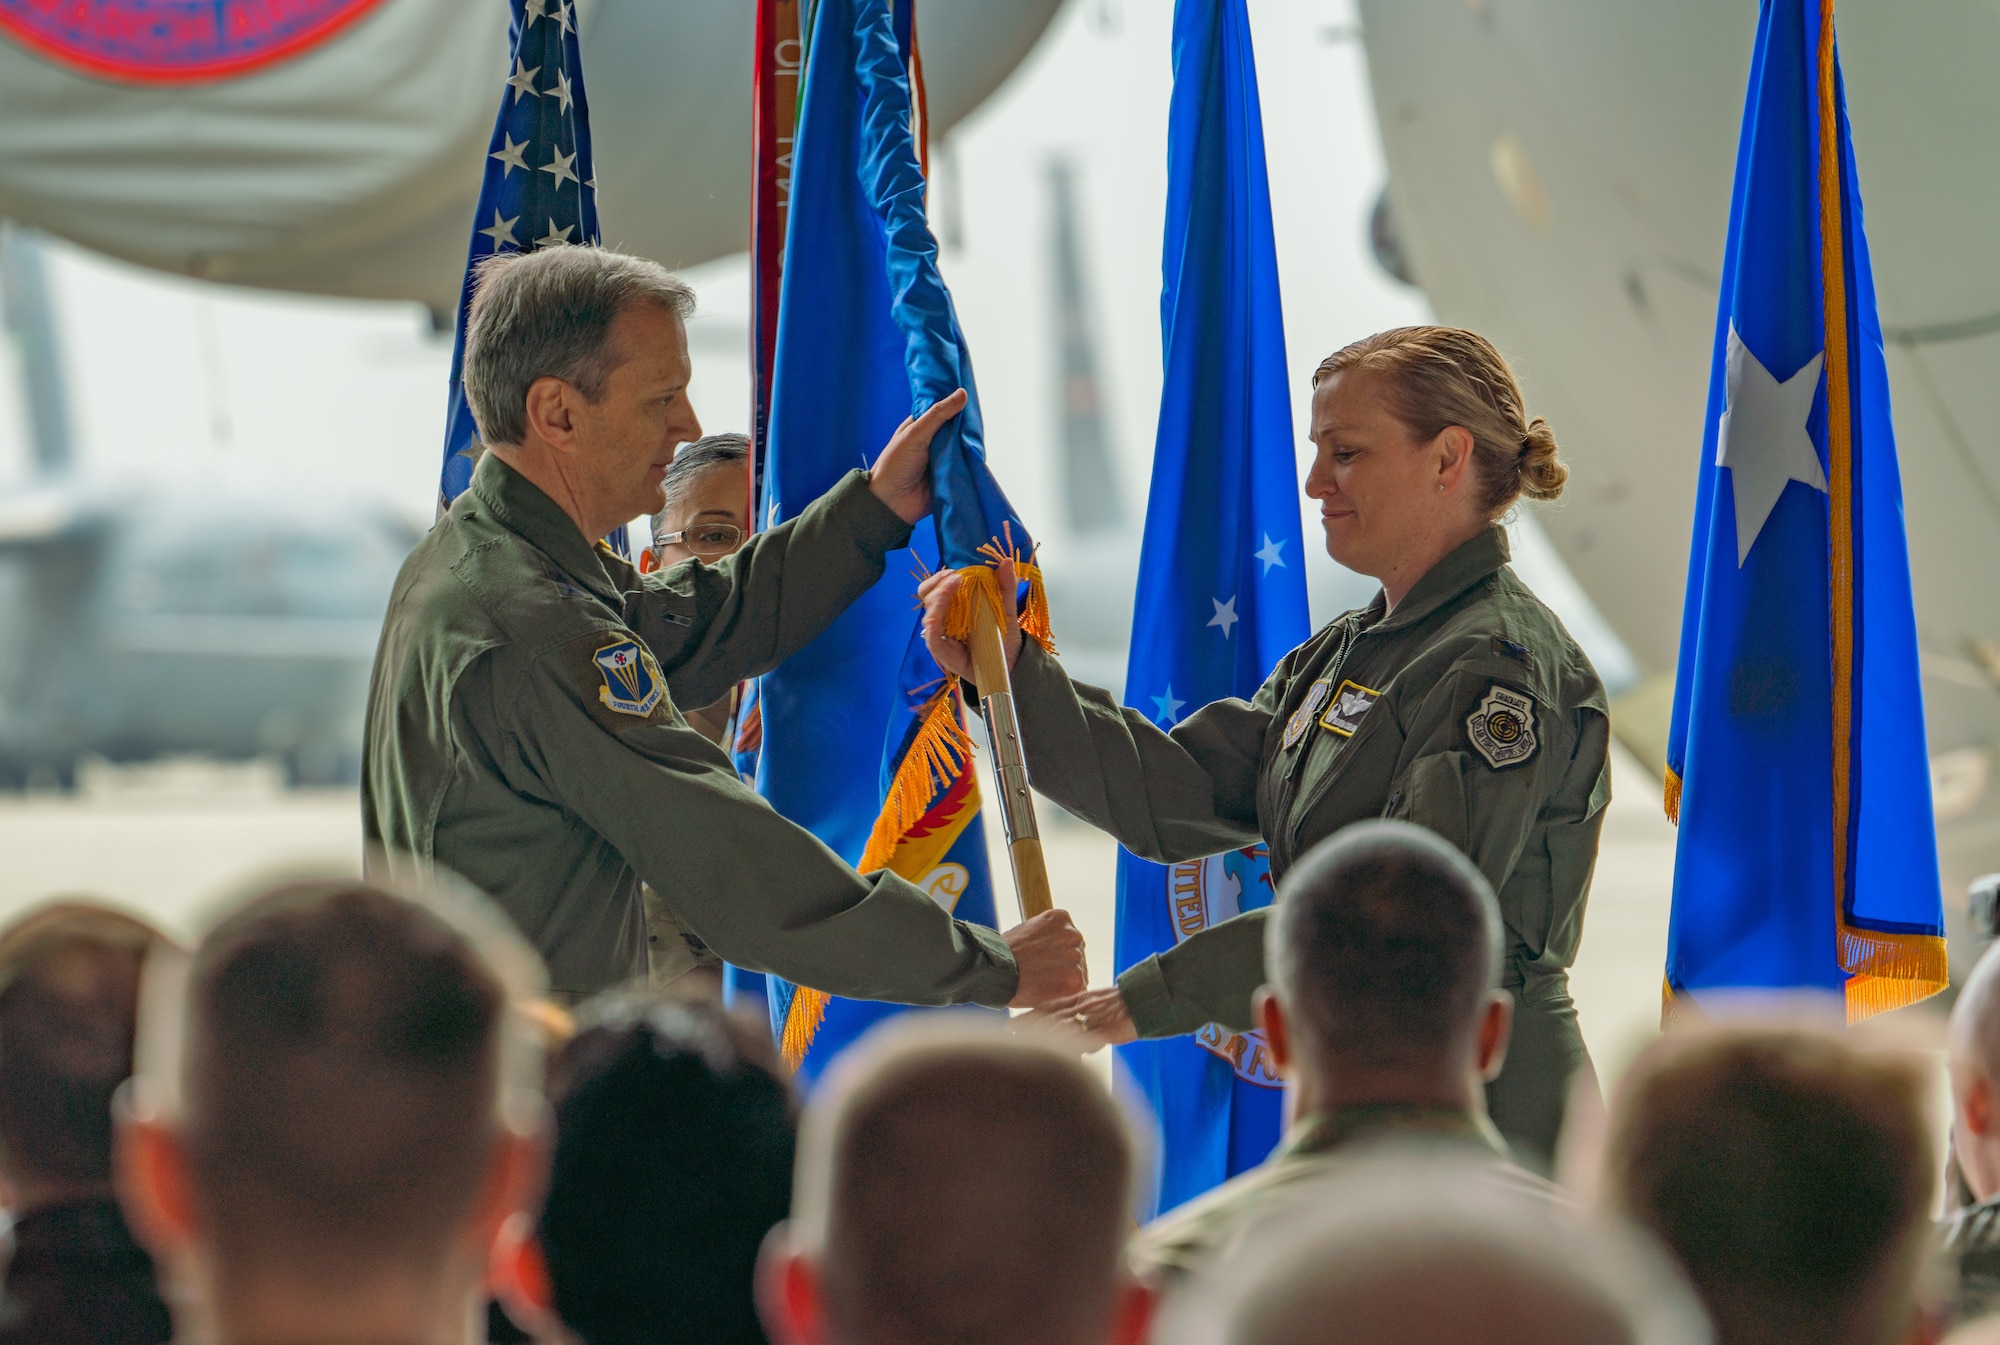 March Field continues to make history with first female base commander